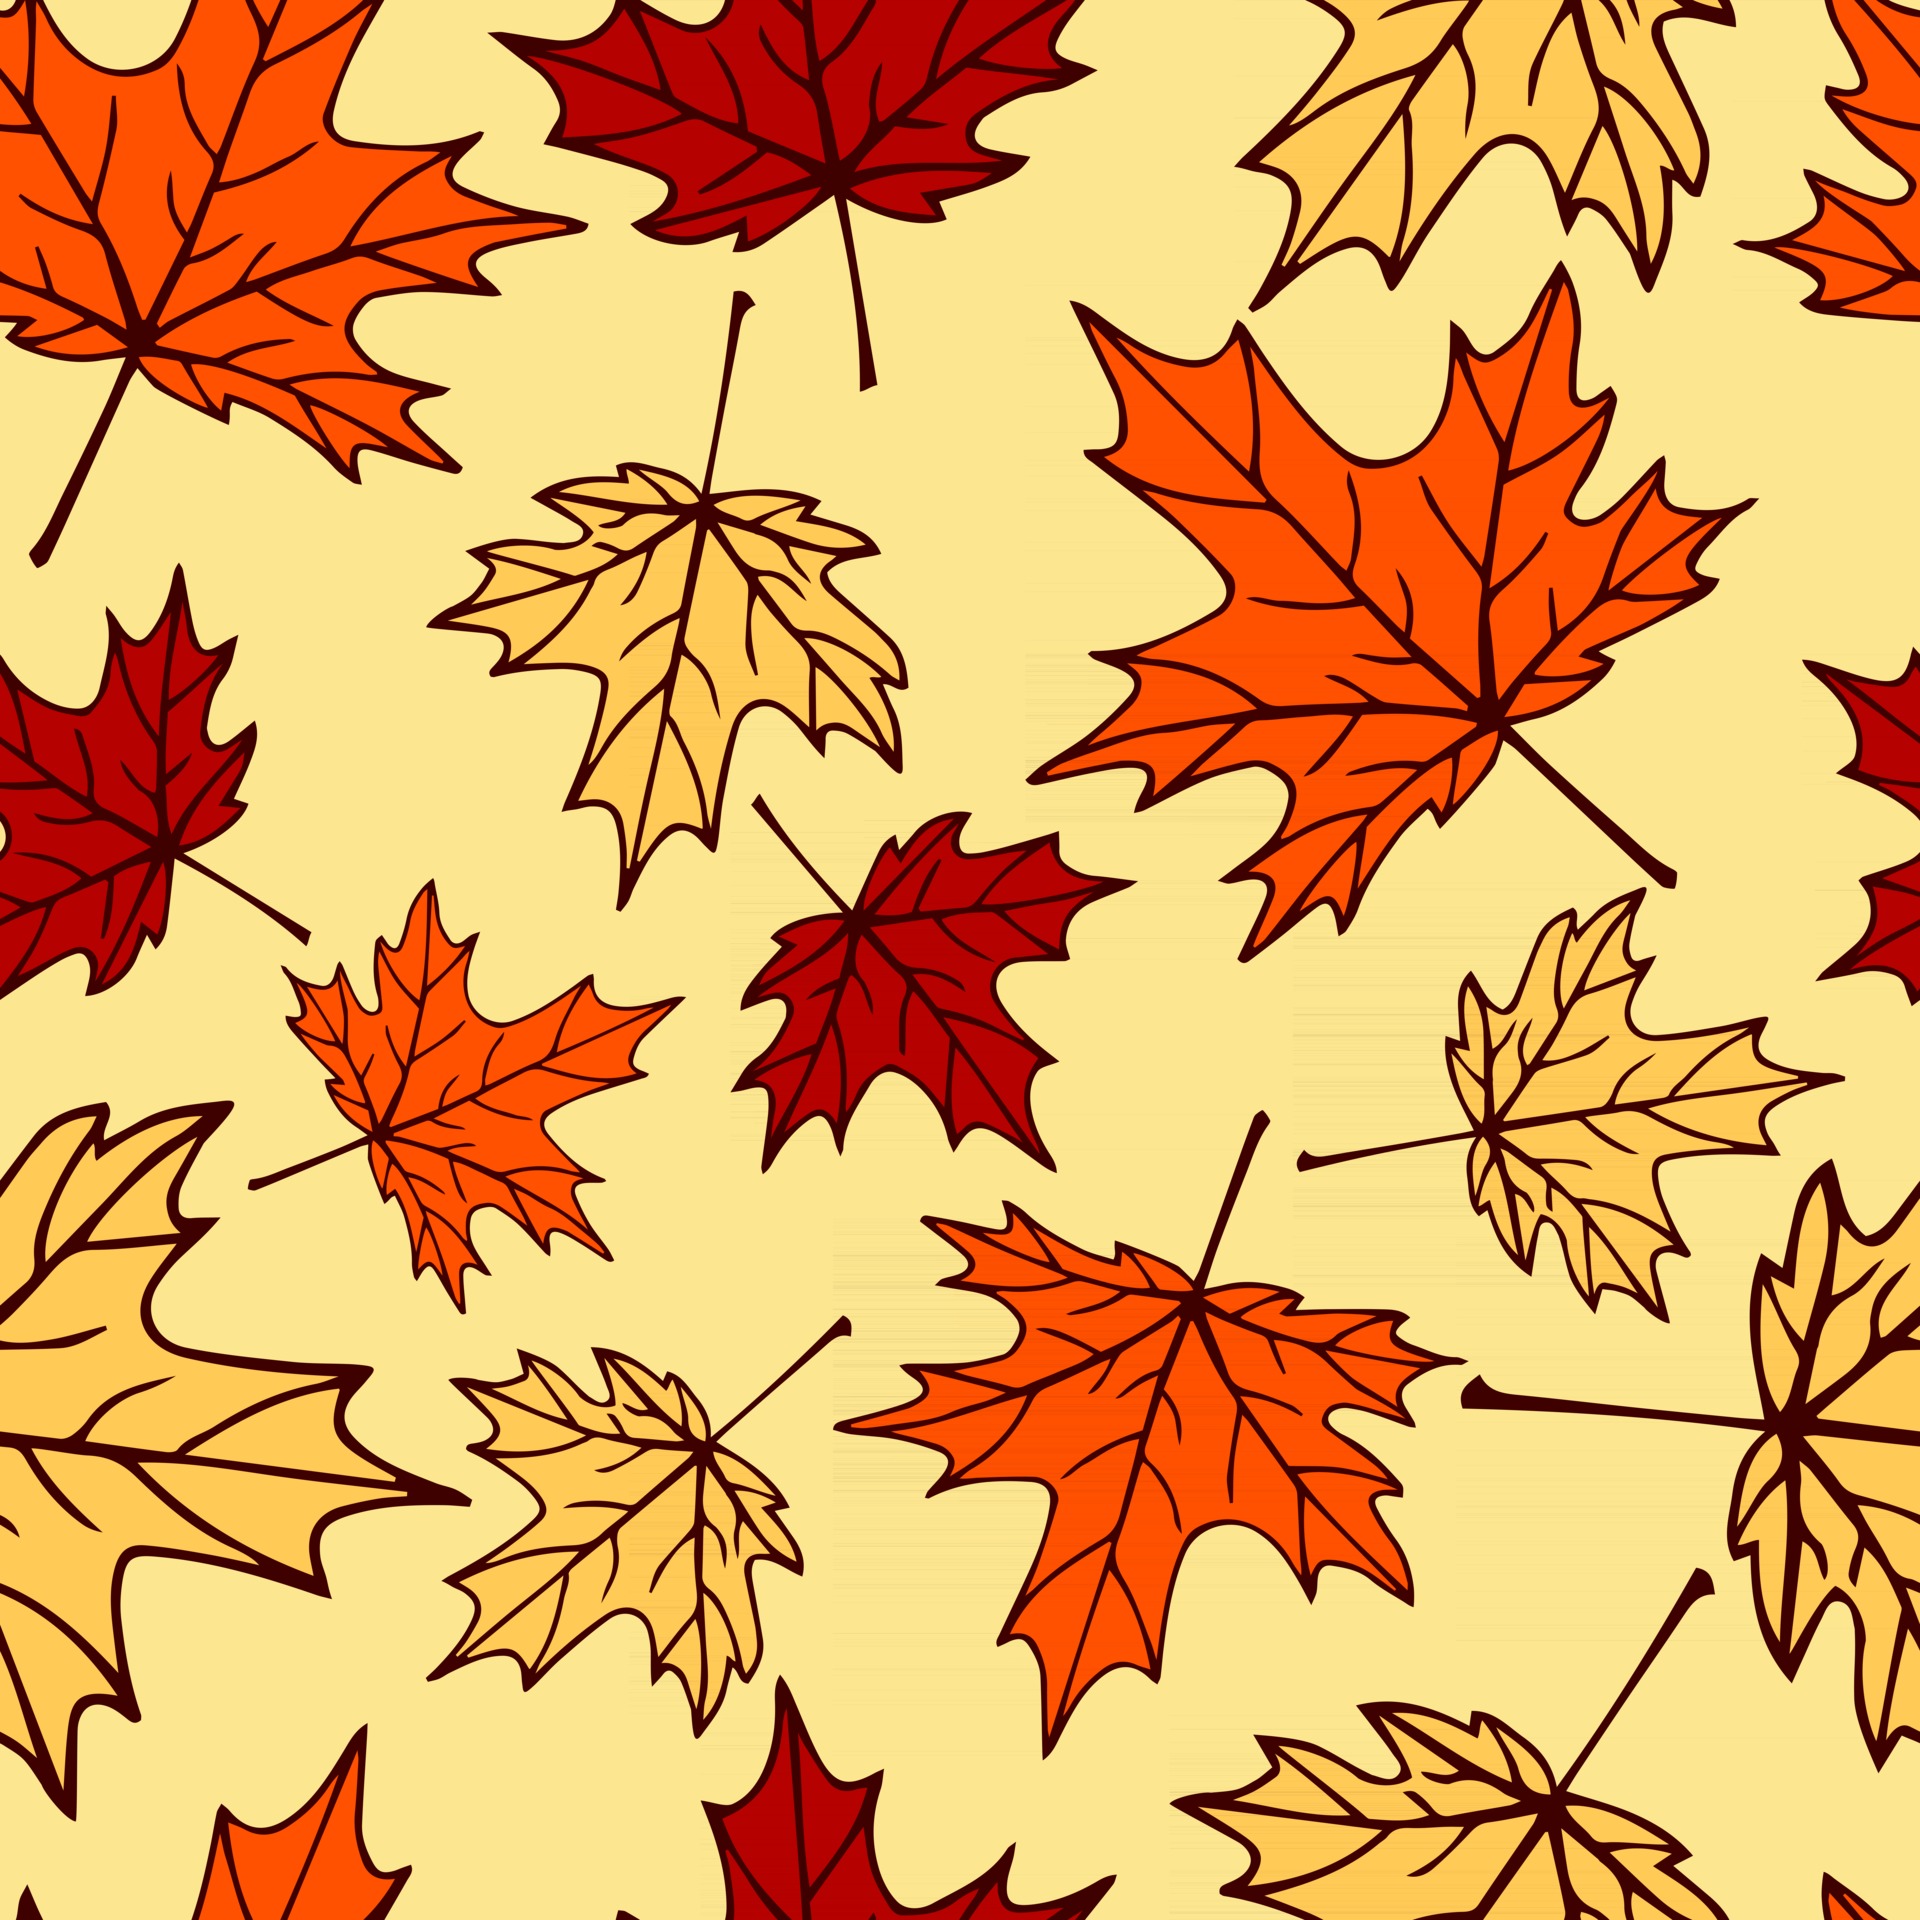 Seamless pattern with autumn maple leaves in orange, beige, brown colors. Perfect for wallpaper, gift paper, drawing fill, web page background, autumn greeting cards